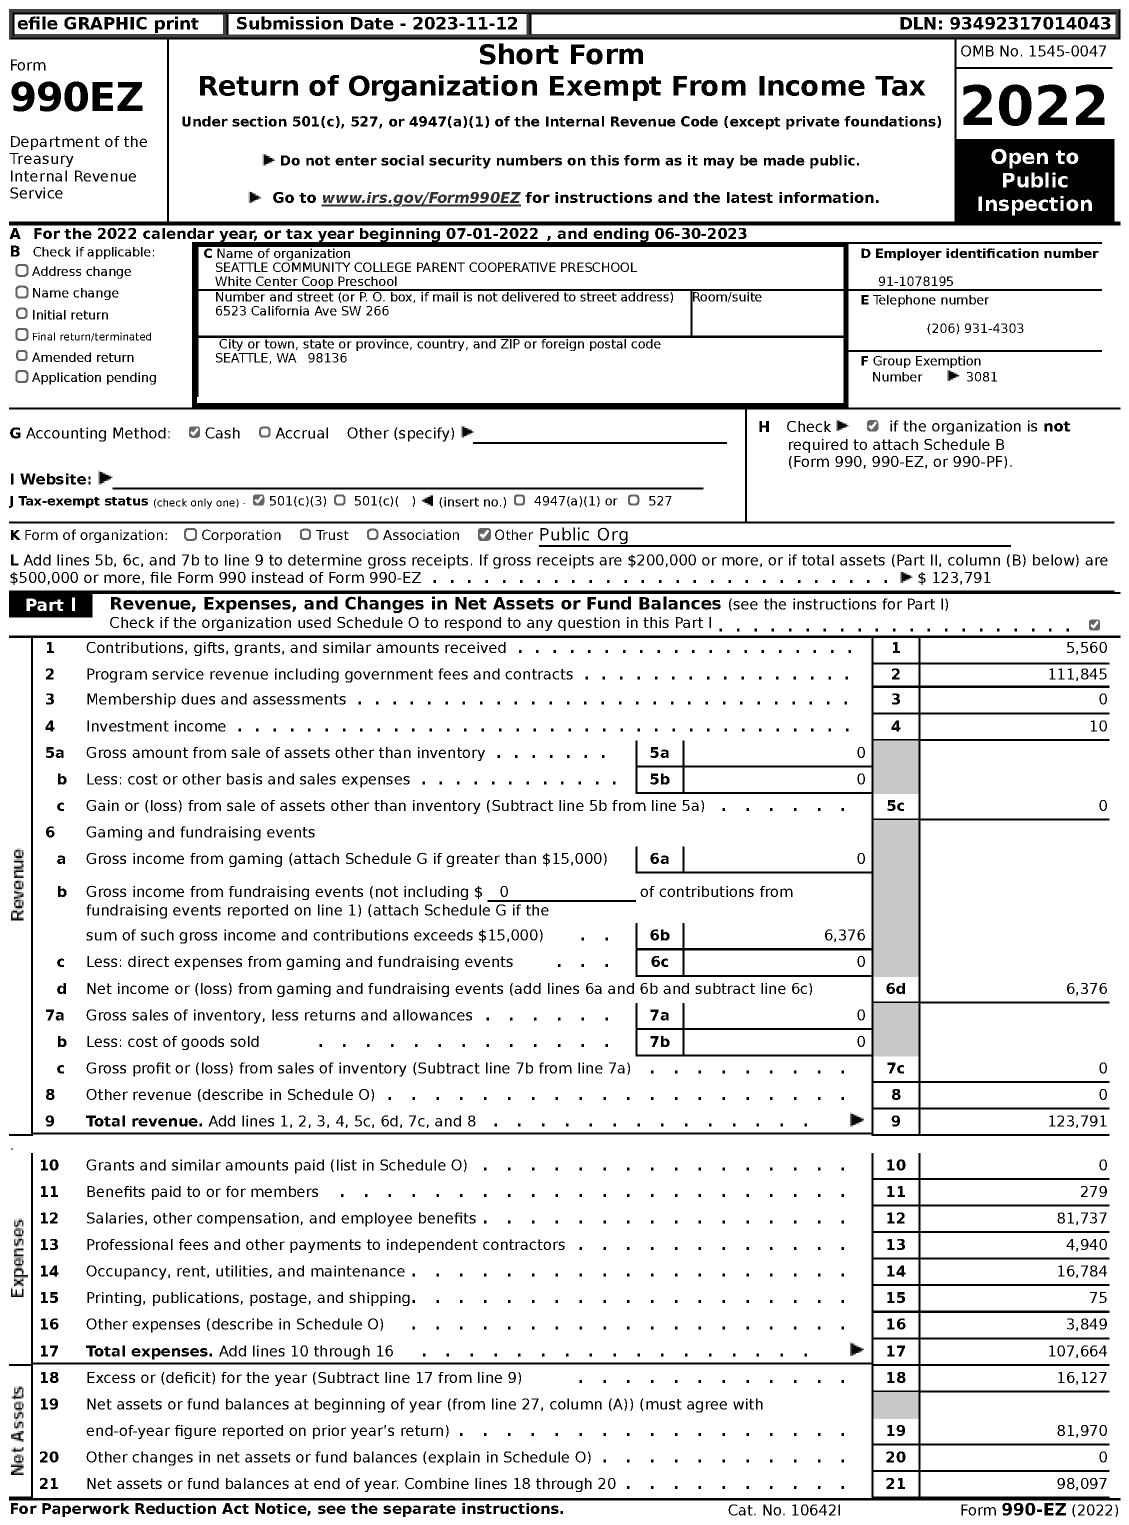 Image of first page of 2022 Form 990EZ for SEATTLE COMMUNITY COLLEGE PARENT COOPERATIVE PRESCHOOL White Center Coop PRESCHOOL